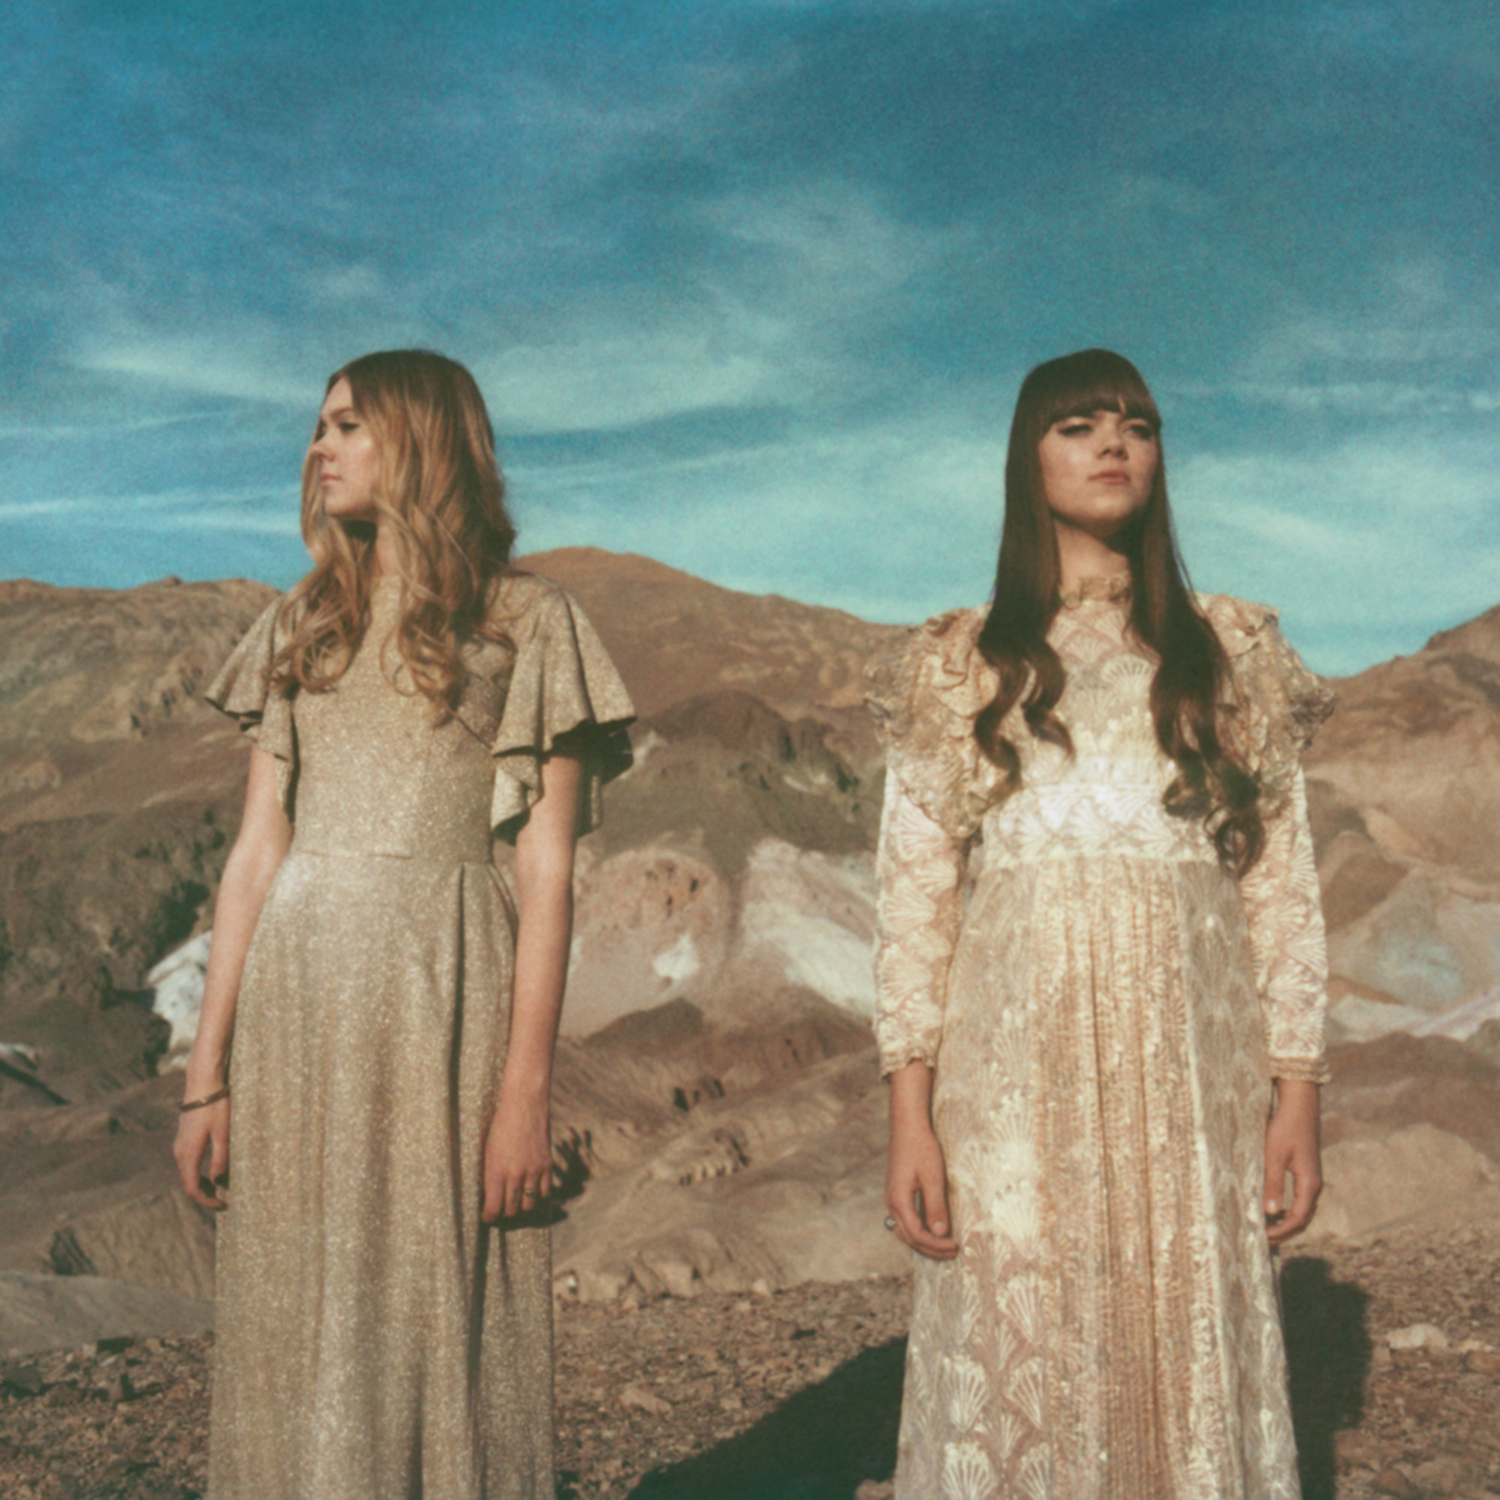 Interview – First Aid Kit at Roskilde Festival 2015